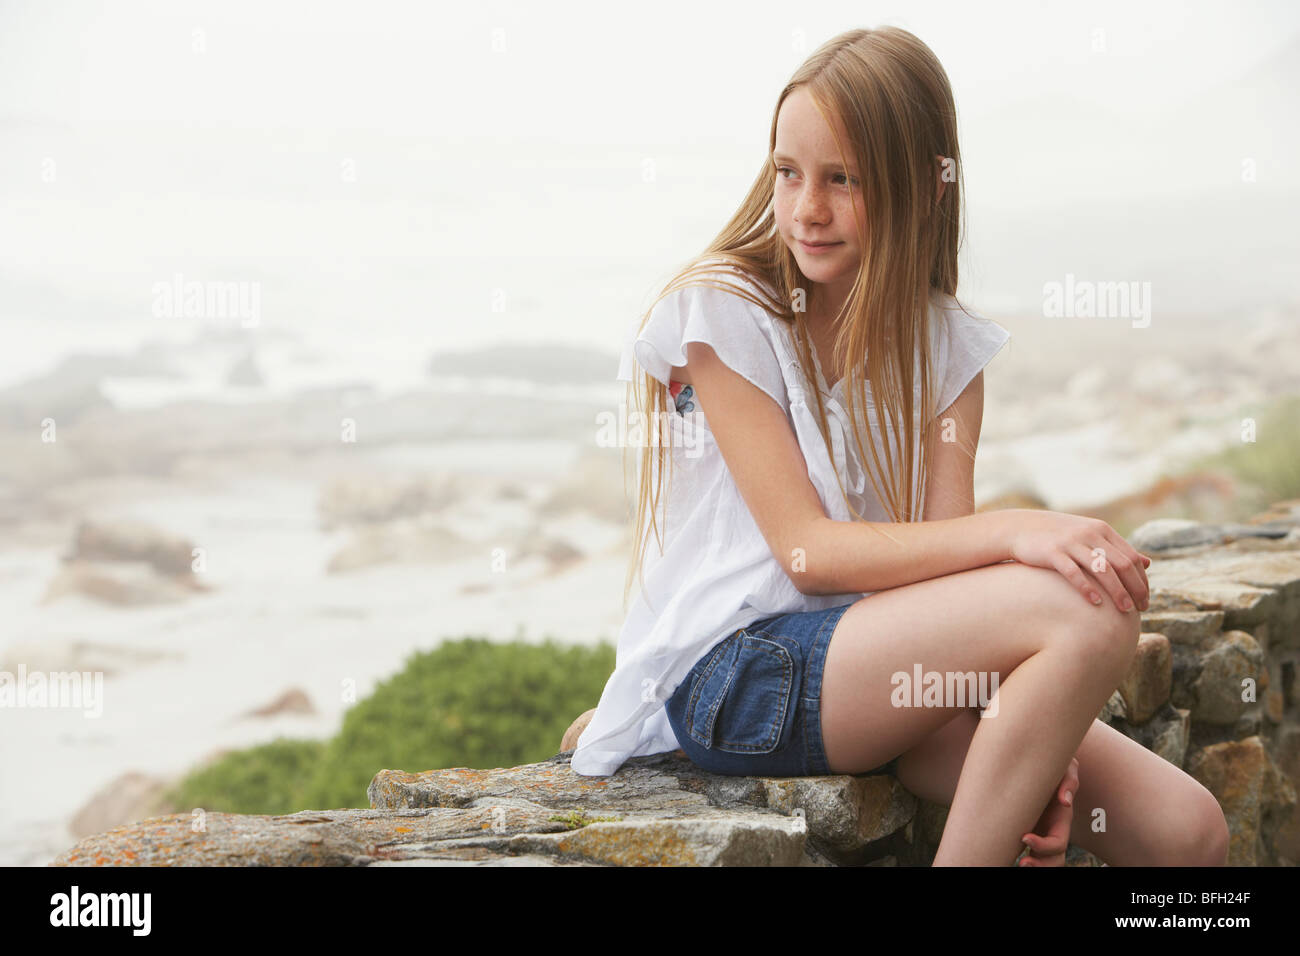 Girl Sitting on Wall Banque D'Images